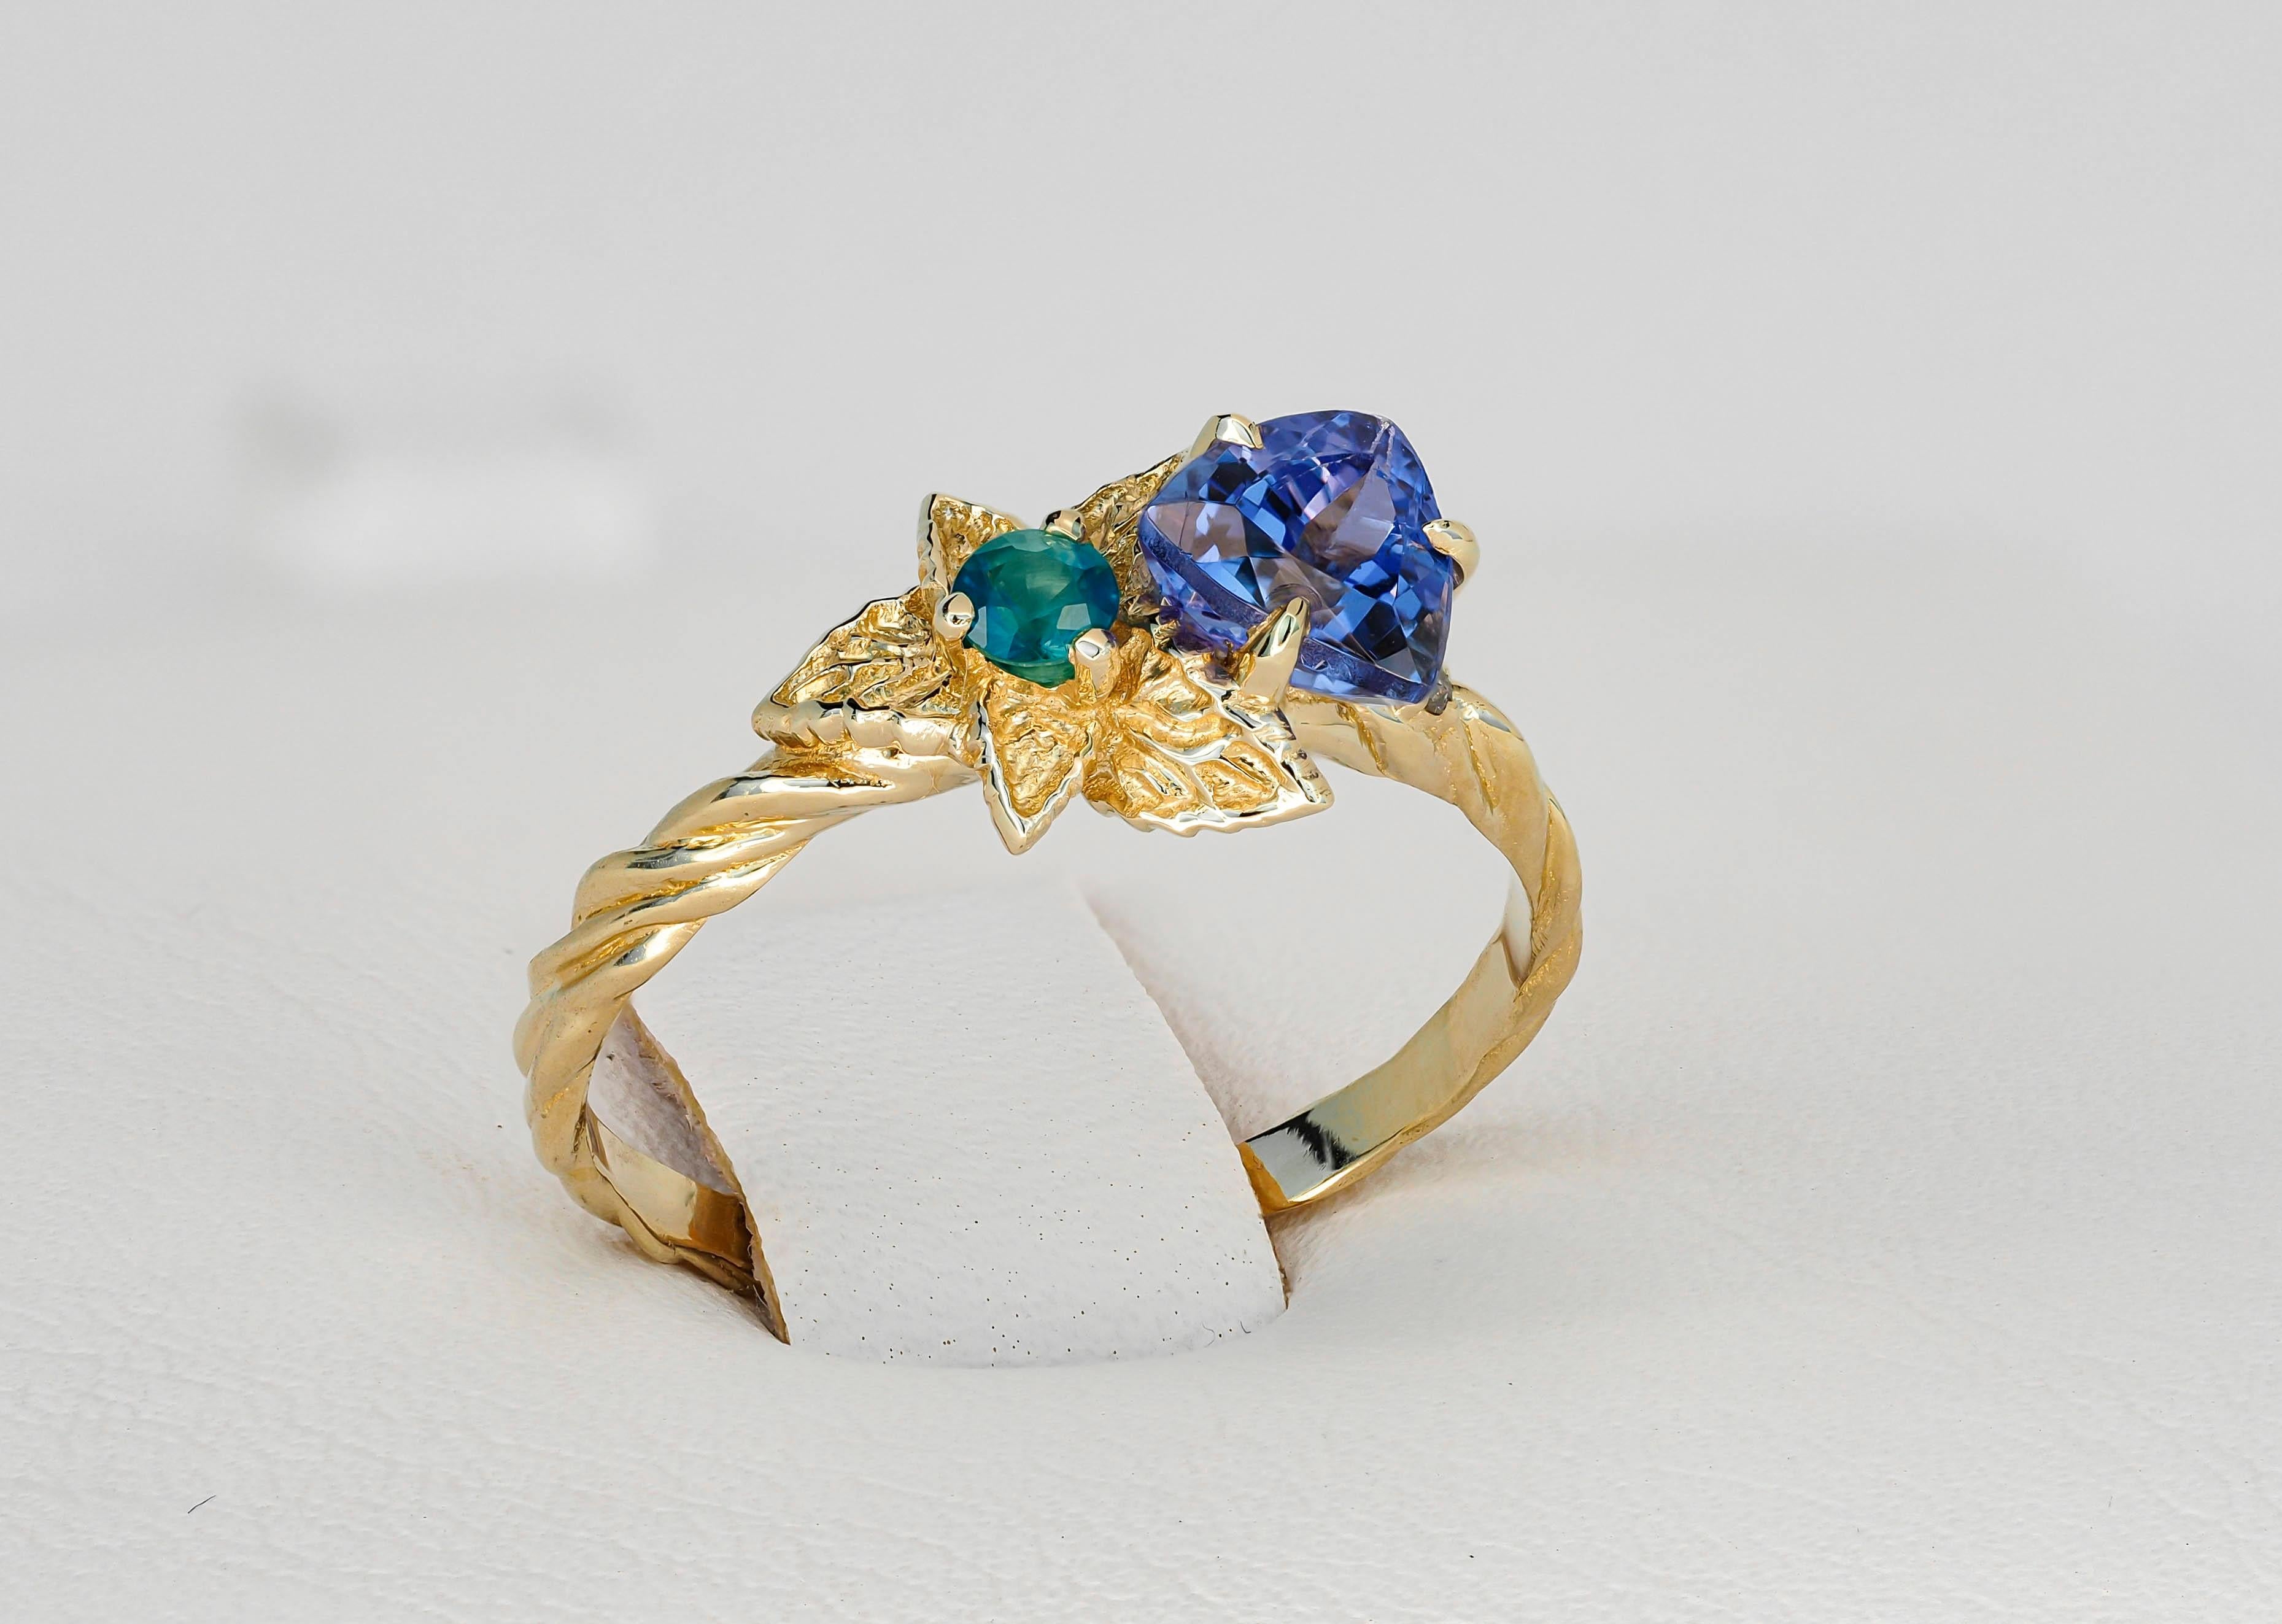 For Sale:  Tanzanite and diamonds 14k gold ring. Flower design ring with tanzanite. 6